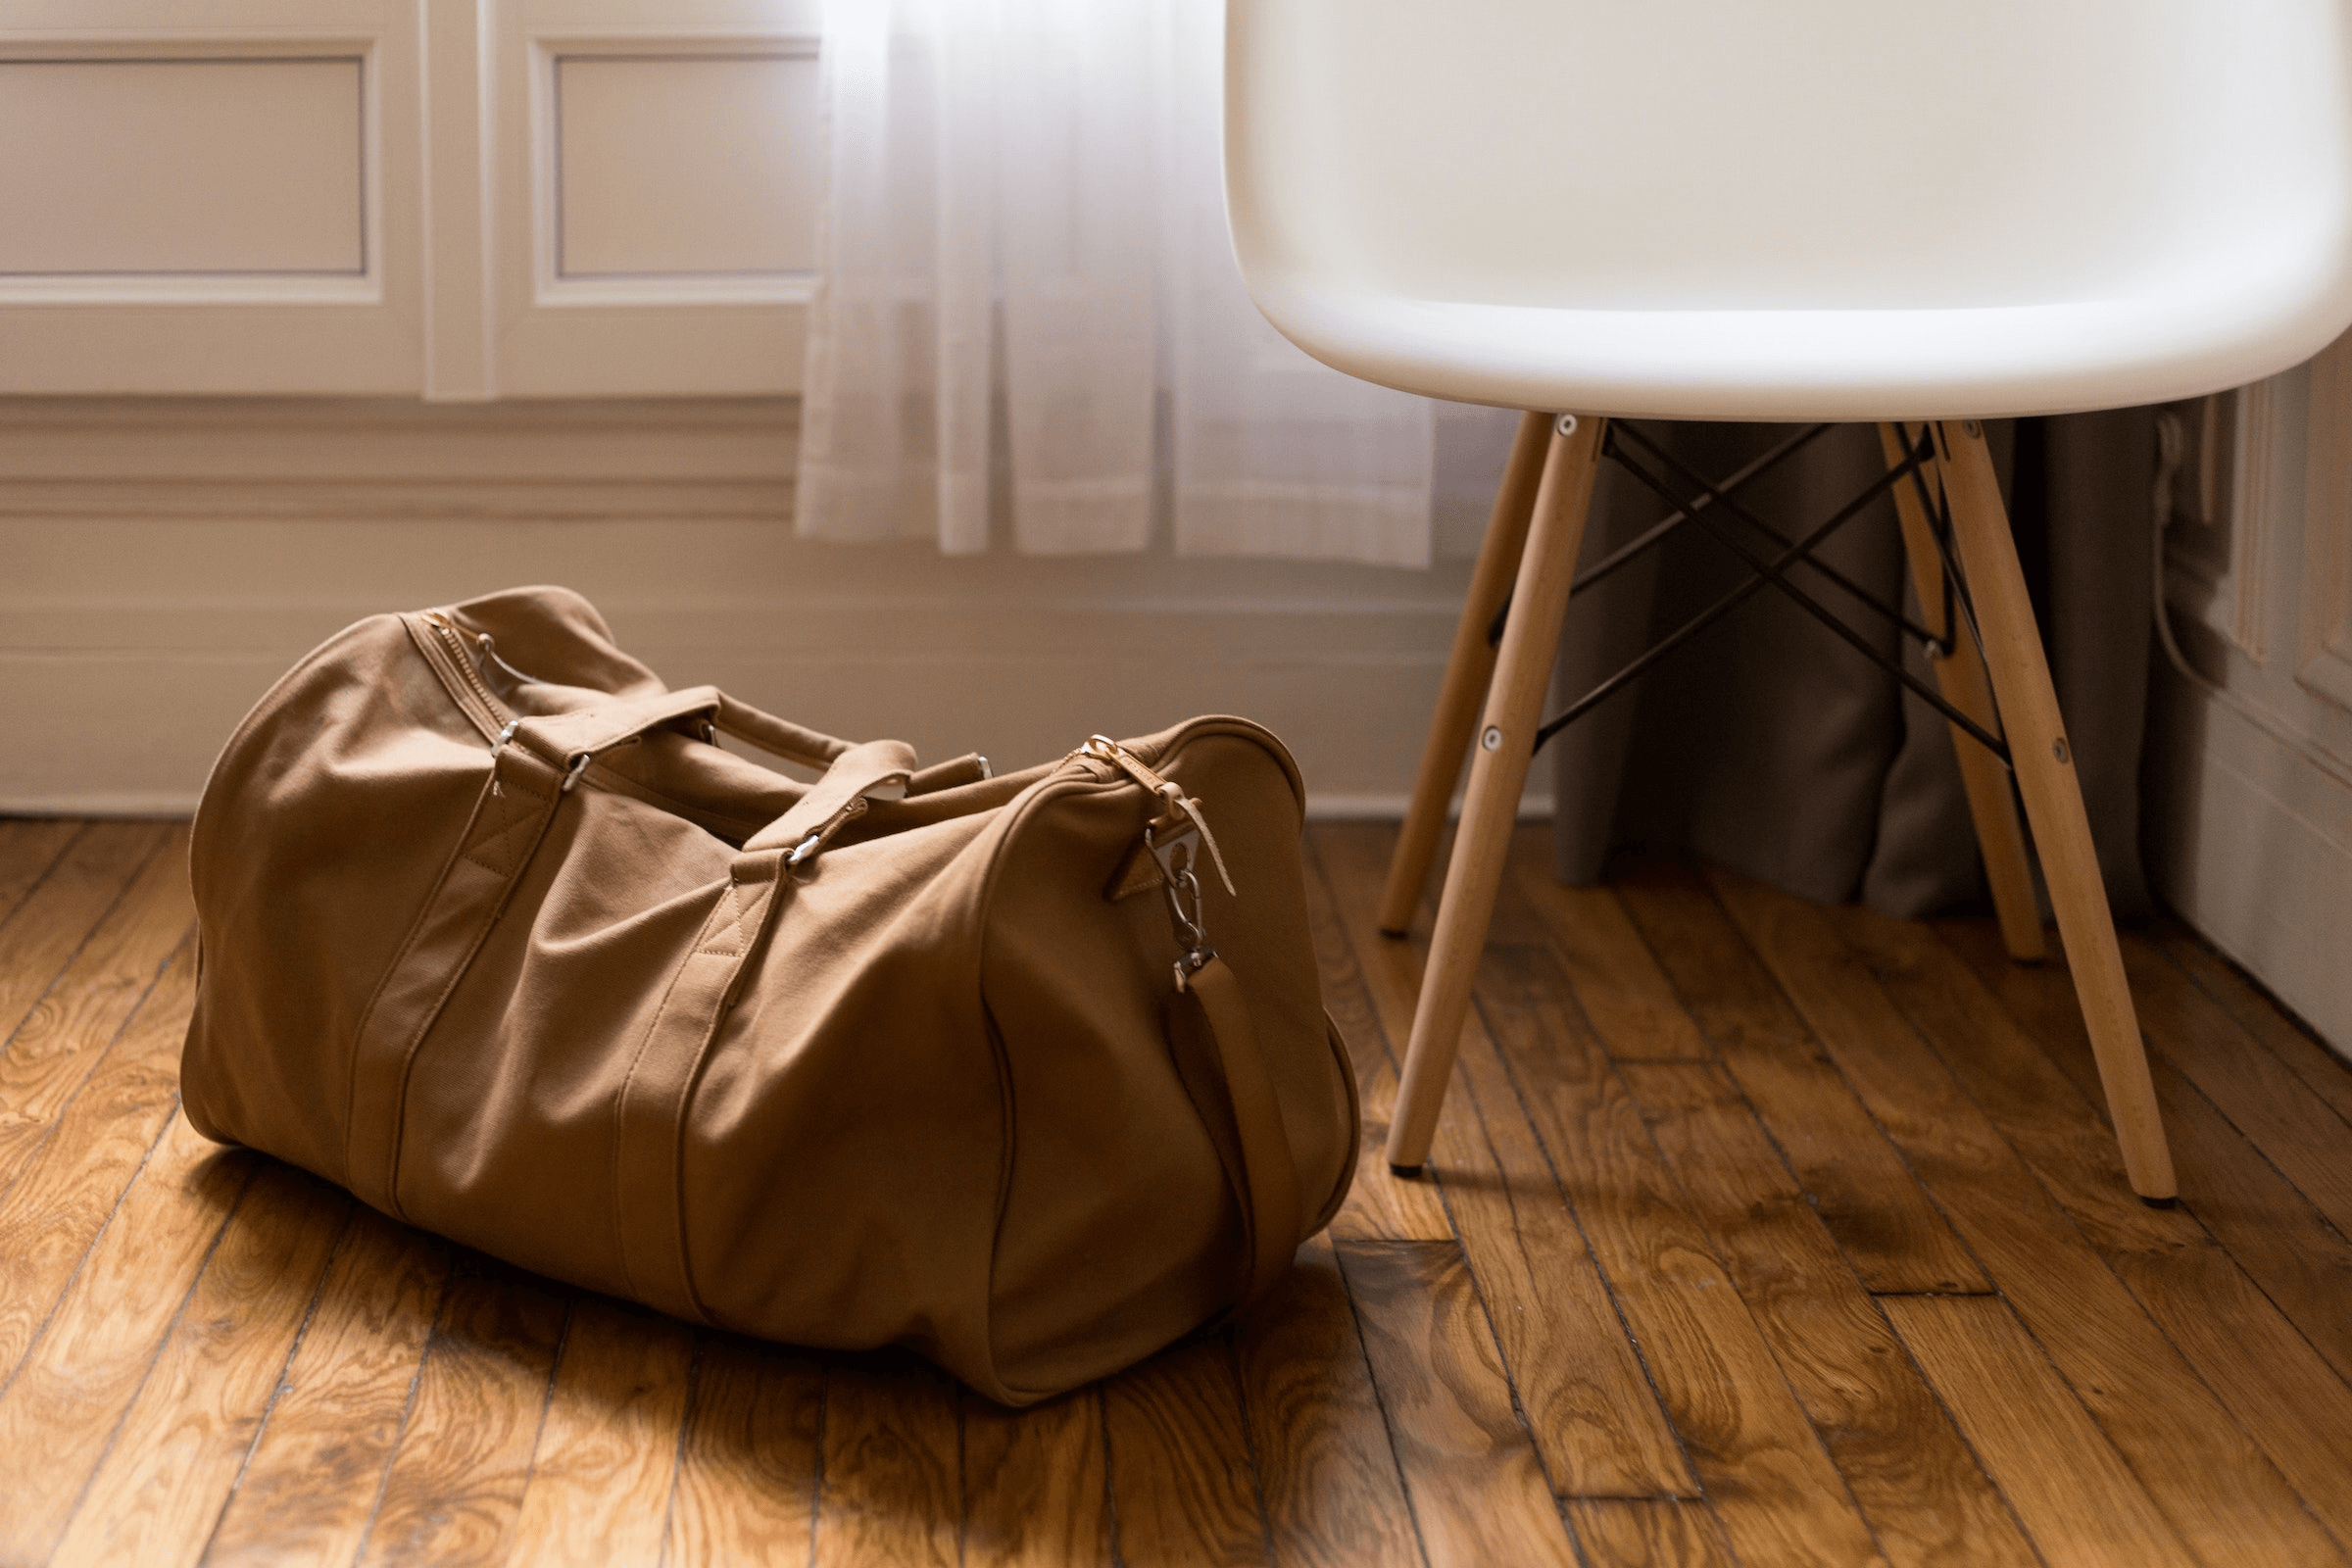 Top 10 Things to Pack in Your Hospital Bag